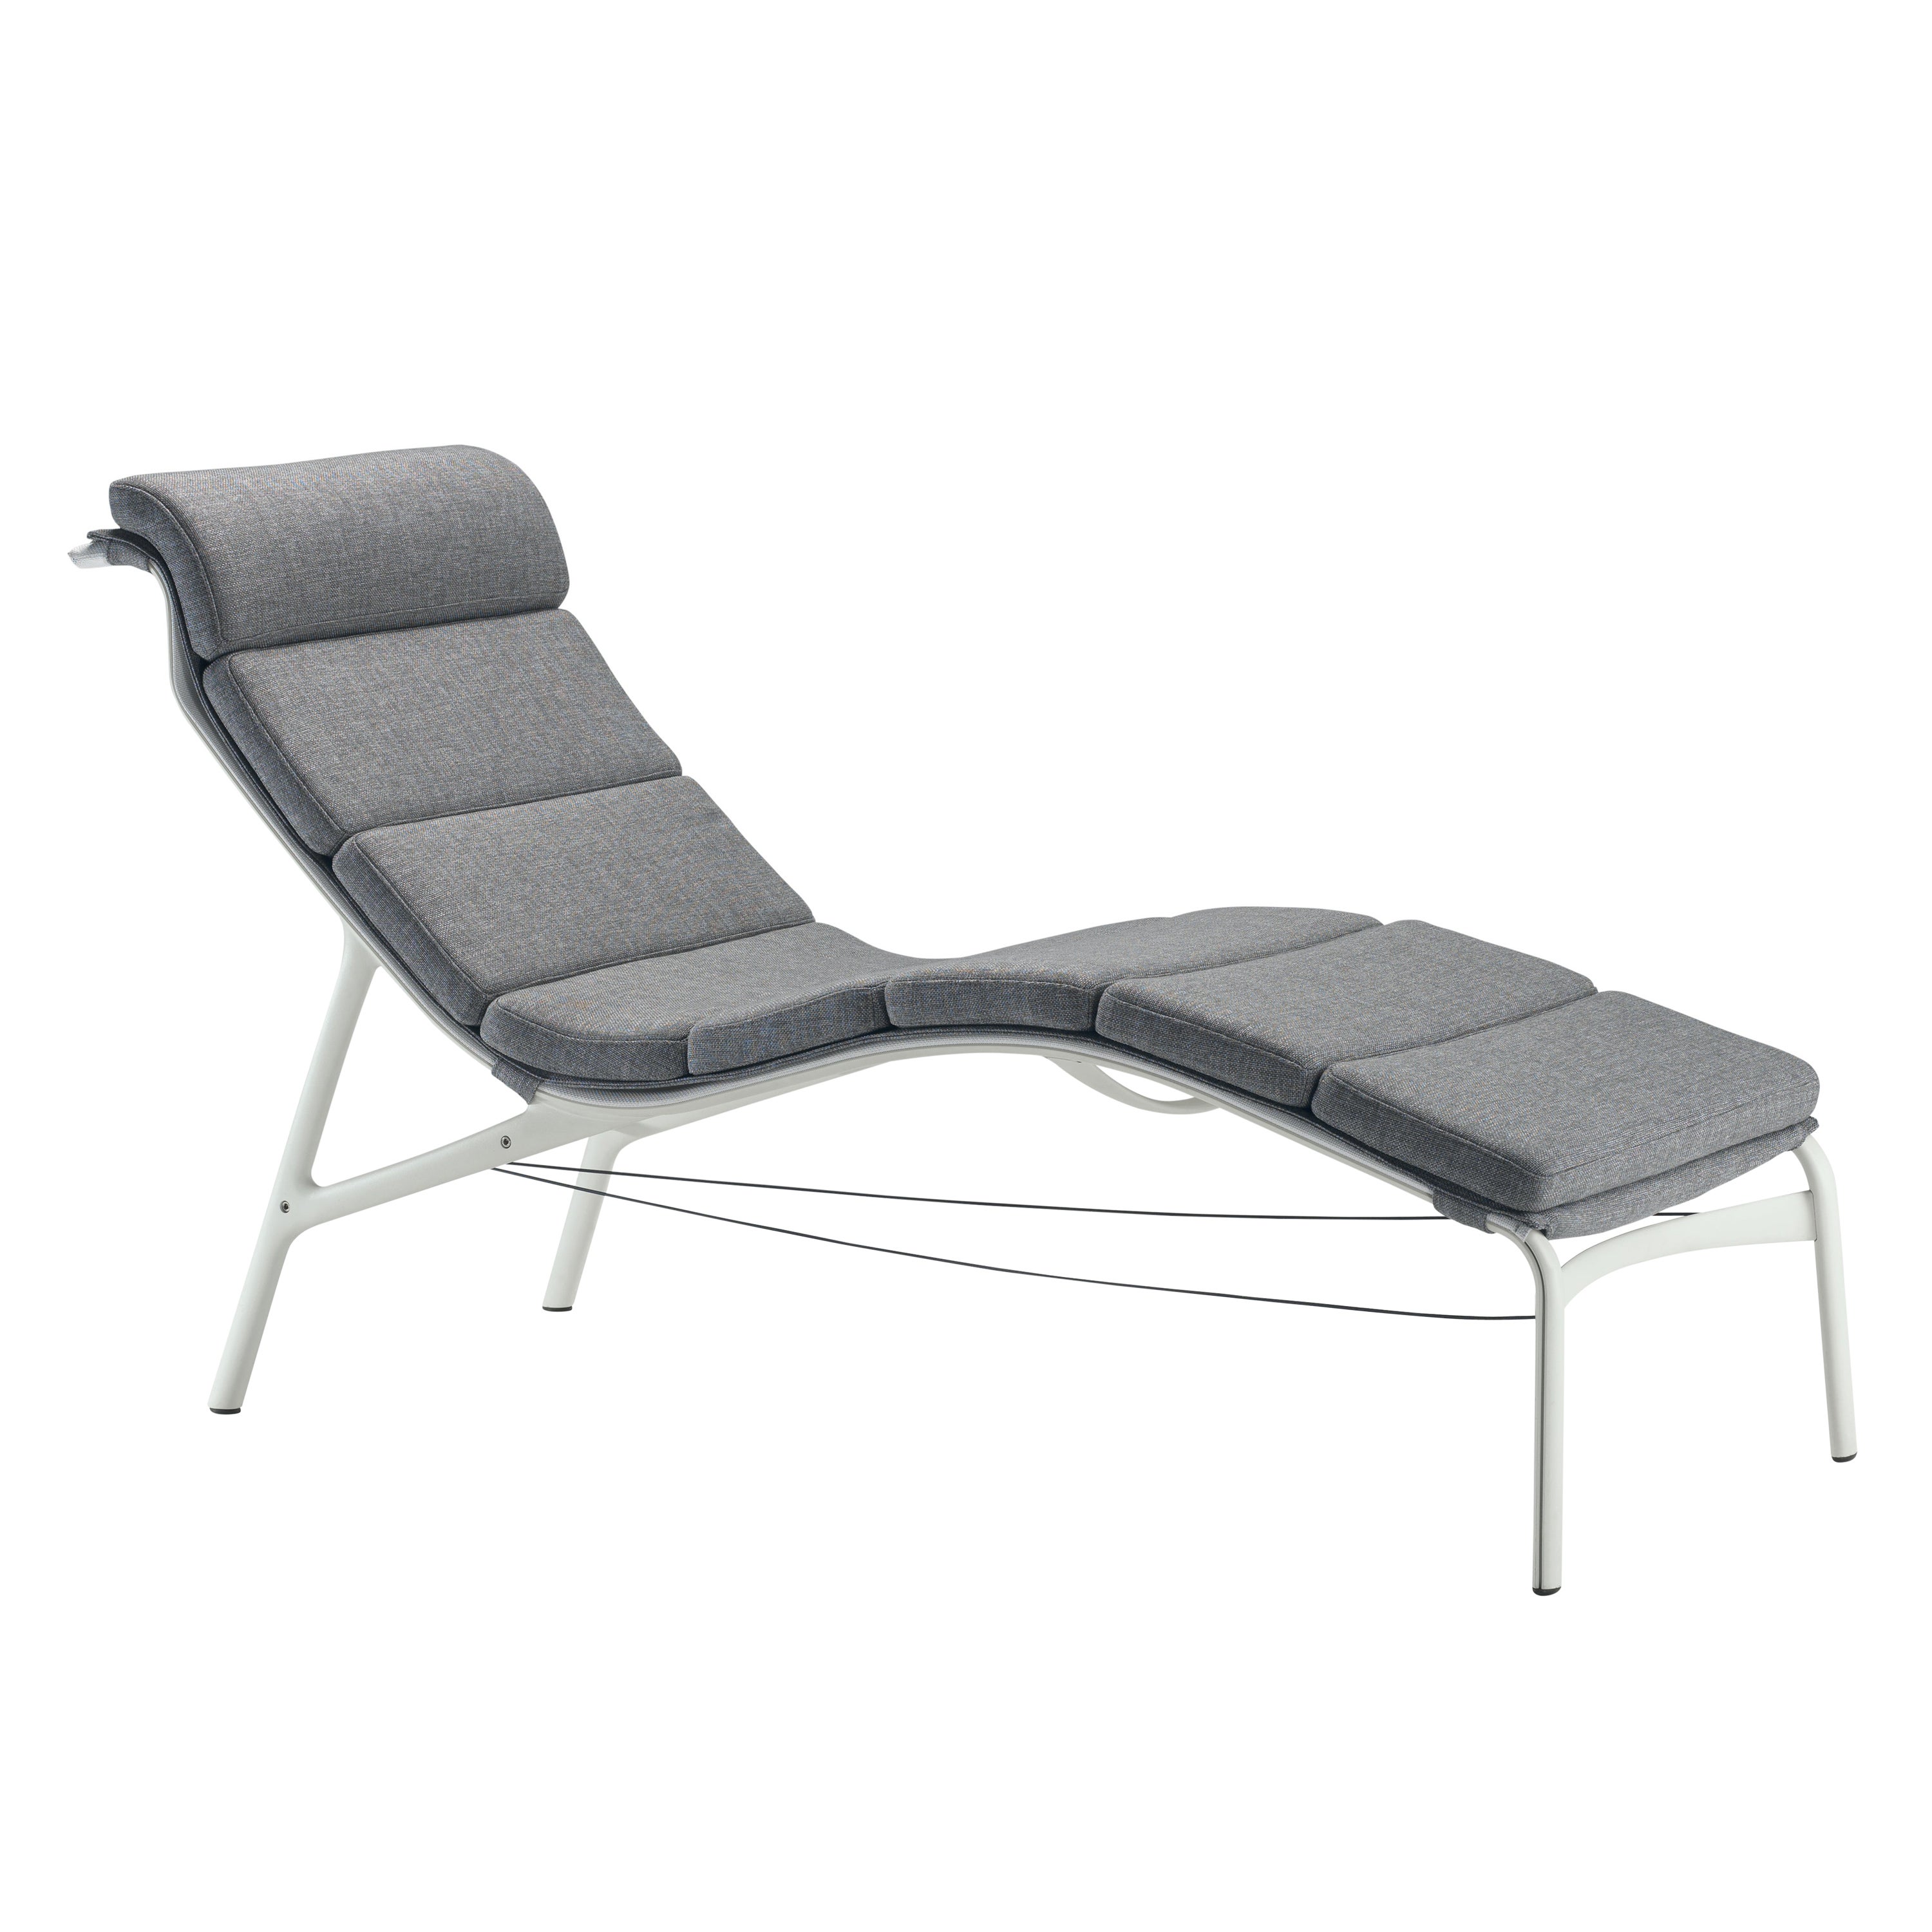 Alias 414 Longframe Soft Outdoor Chair in Grey & White Lacquered Aluminum Frame For Sale